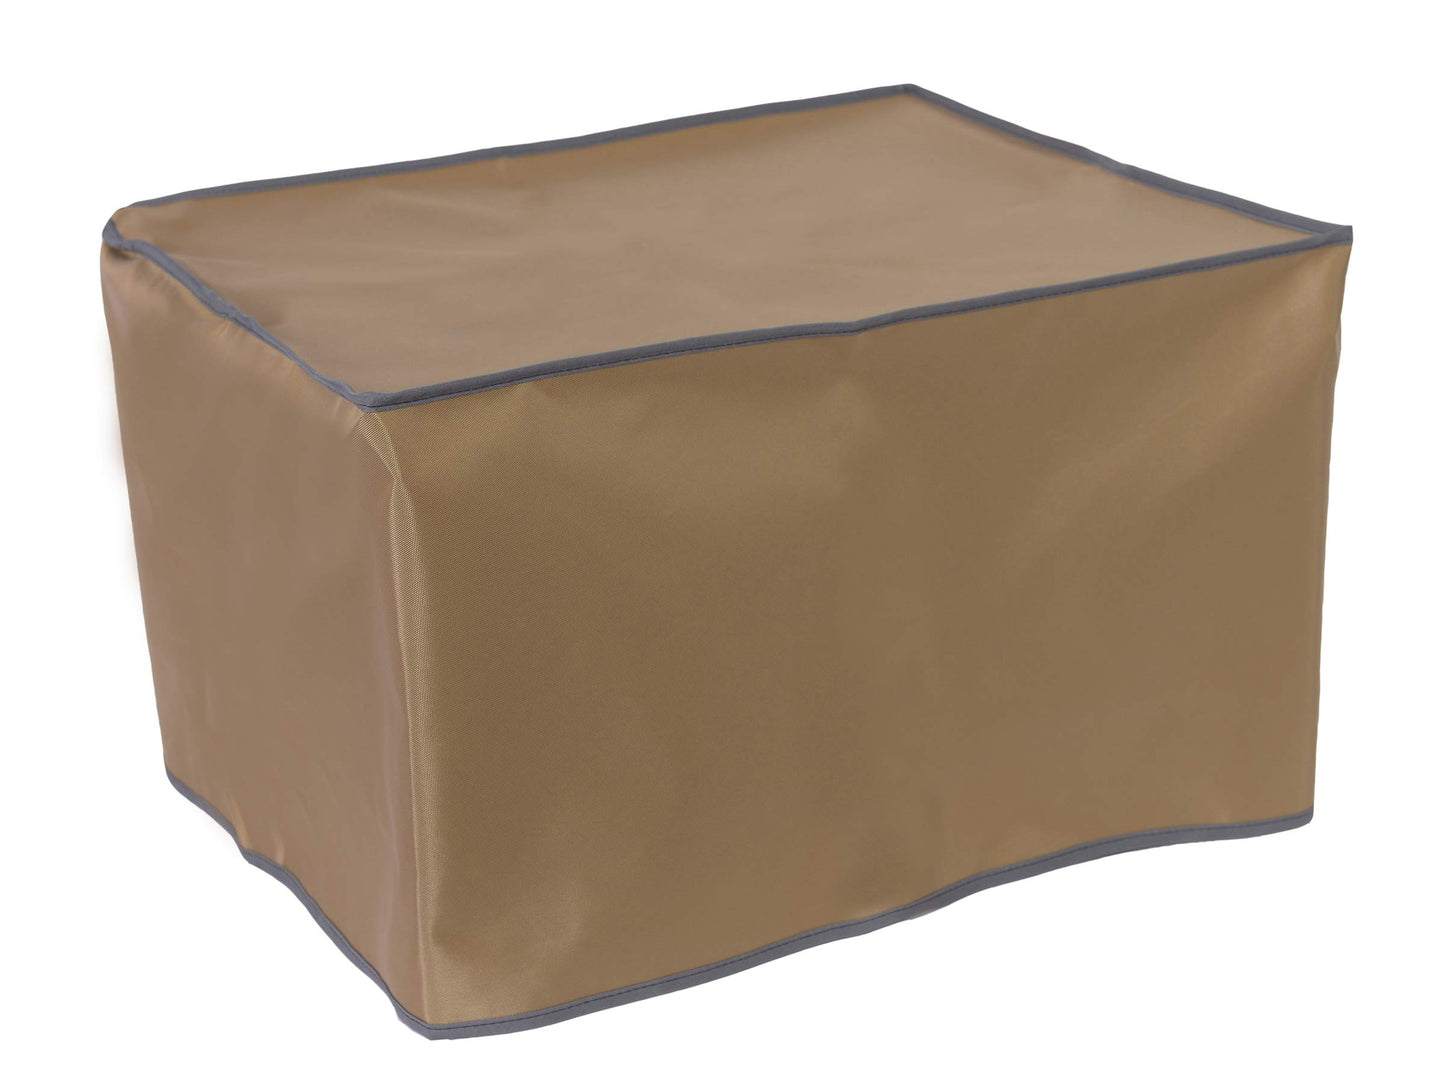 The Perfect Dust Cover, Tan Nylon Cover for HP OfficeJet 5260 All-in-One Printer, Anti Static, Waterproof Cover Dimensions 17.5''W x 14.45''D x 7.5''H by The Perfect Dust Cover LLC